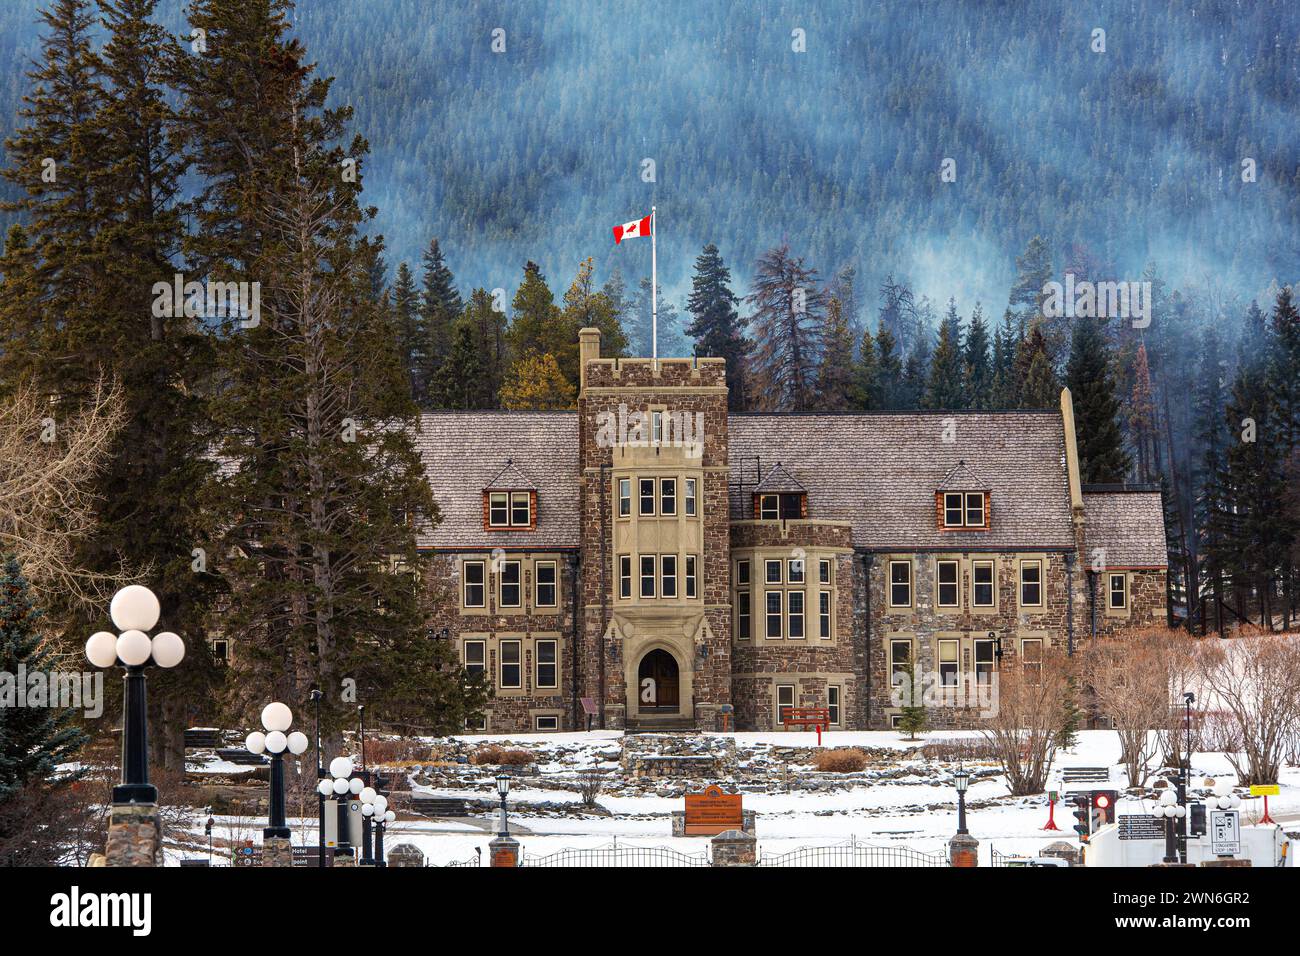 BANFF, ALBERTA, CANADA - FEB. 22, 2024: The Historic Banff National Park Administration Building in the Cascades of Time Garden on Banff Avenue in the Stock Photo